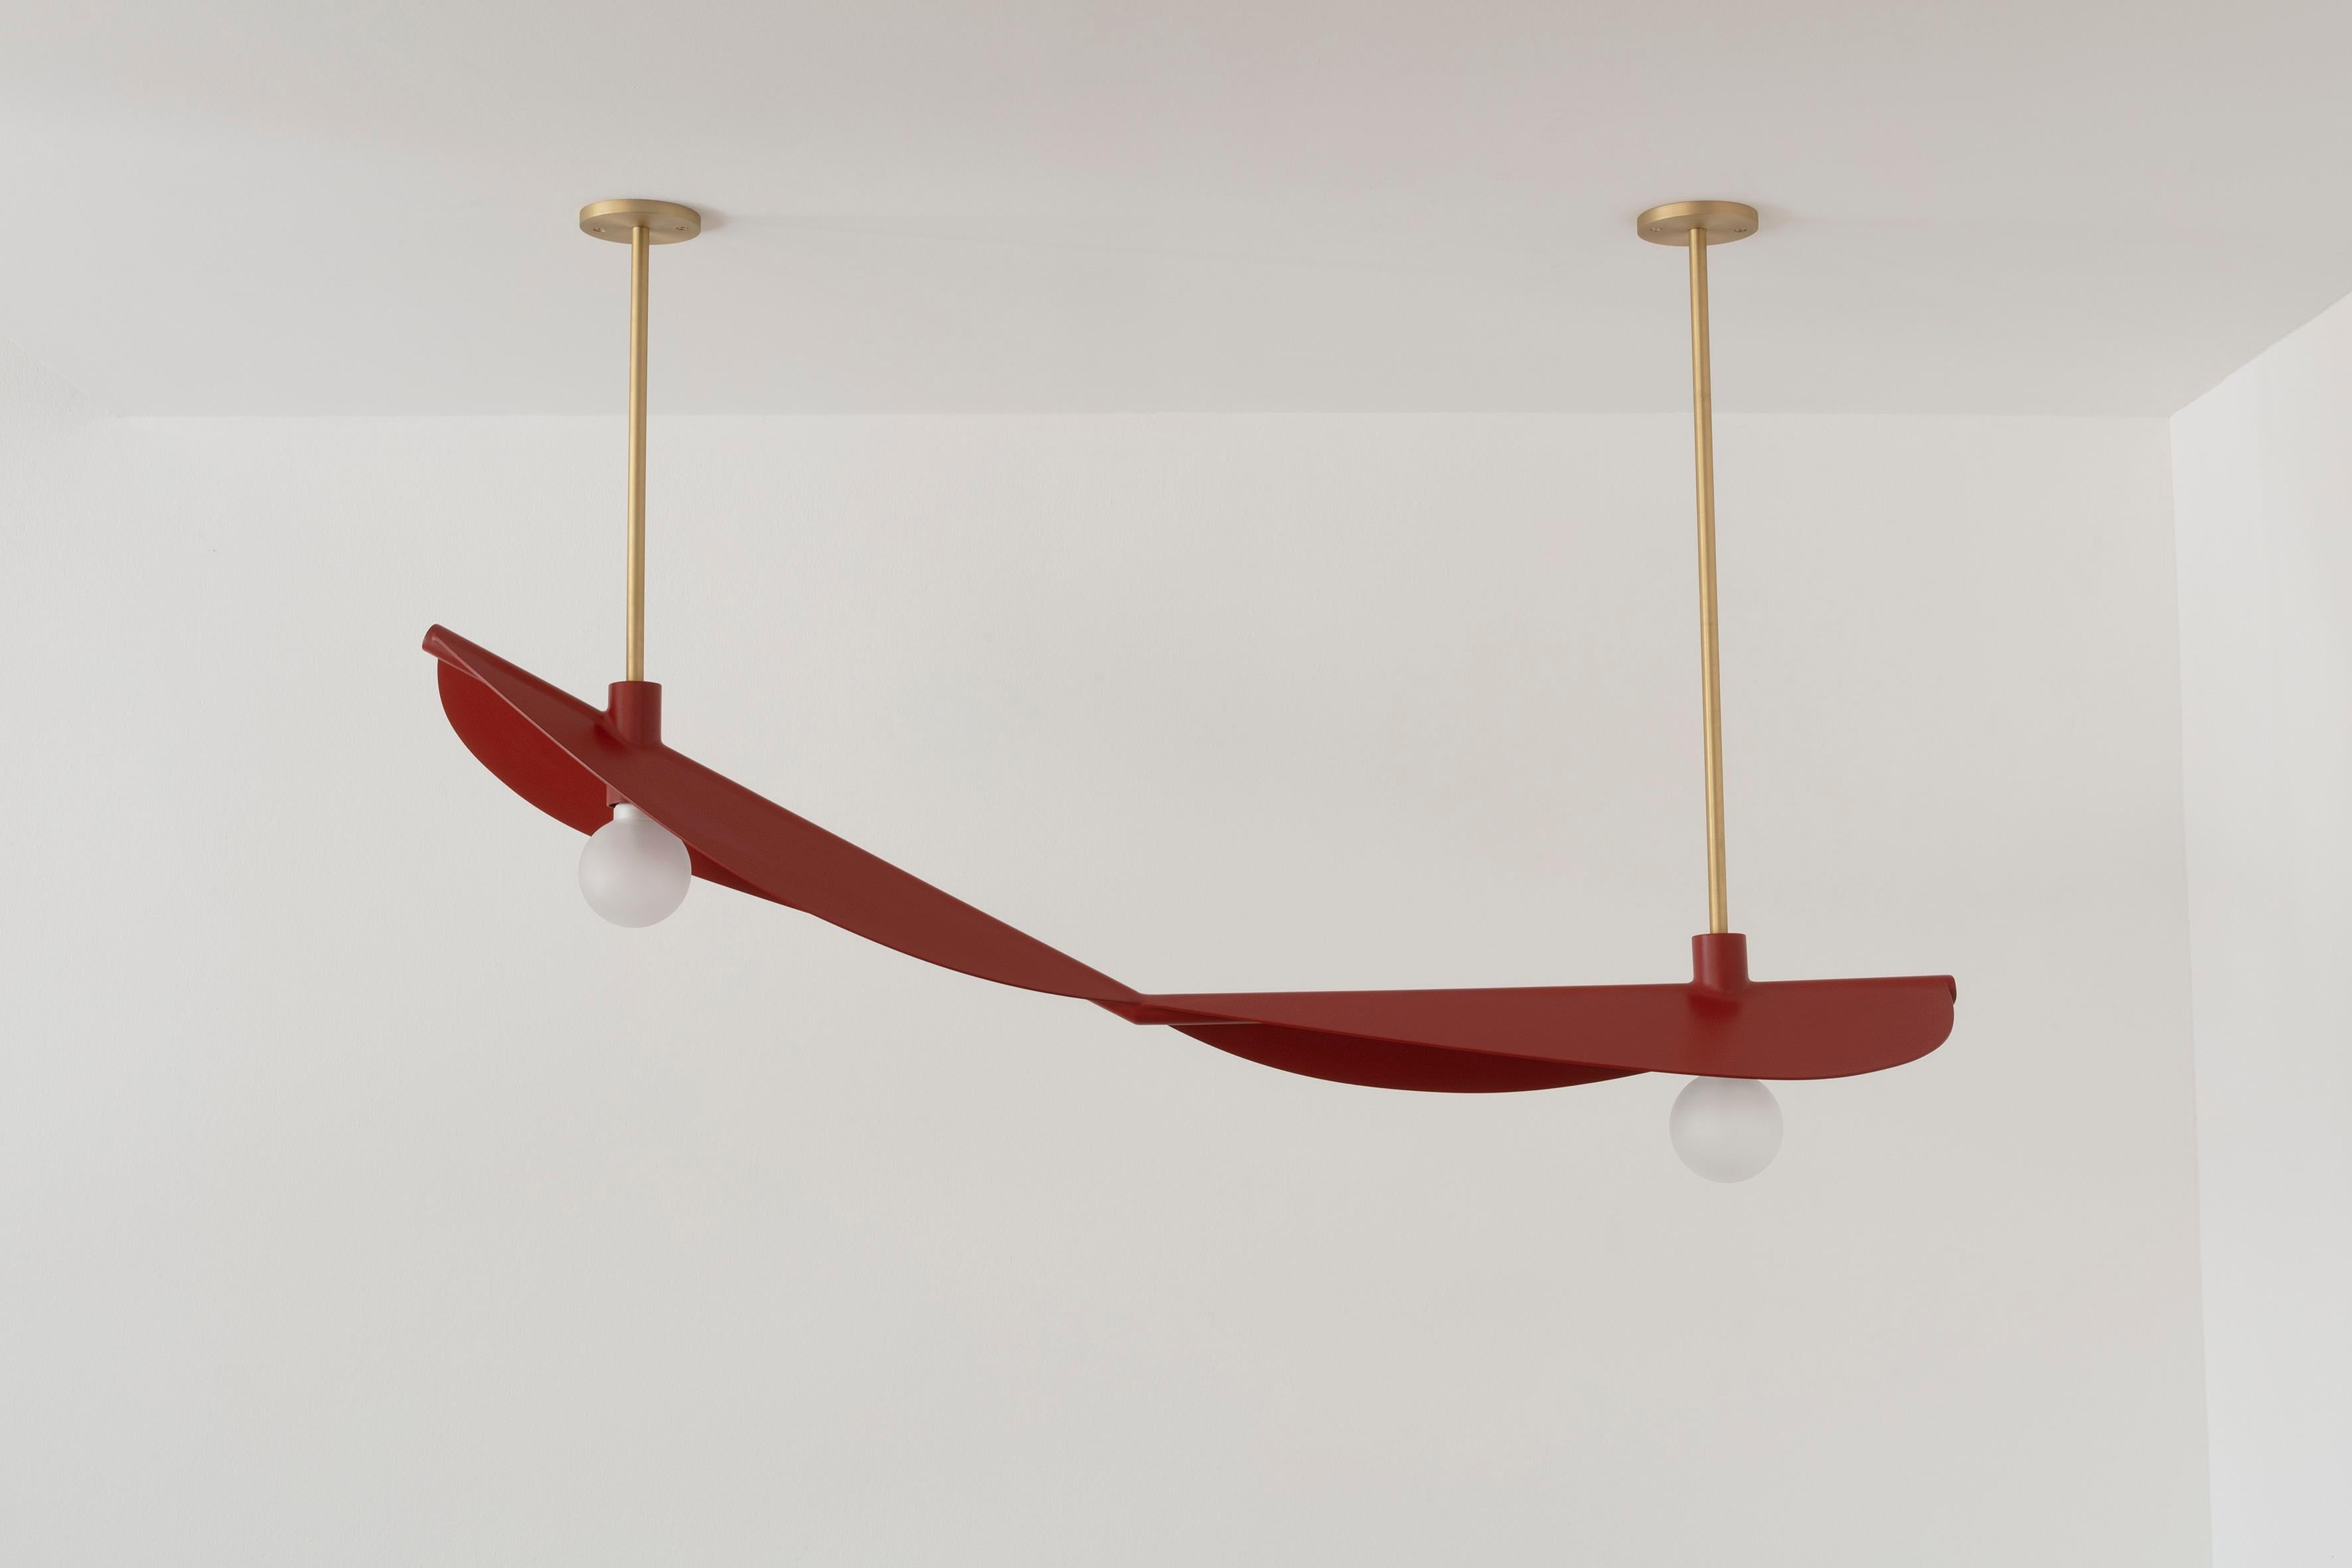 Feuillage duo ceiling mounted burgundy - Carla Baz
Dimensions: L 140 x W 30 x H 80 cm
Weight: 10 kg
Material: Painted steel, Brass

Feuillage is a lighting installation composed of fine metal leaves delicately welded on a branch holding frosted